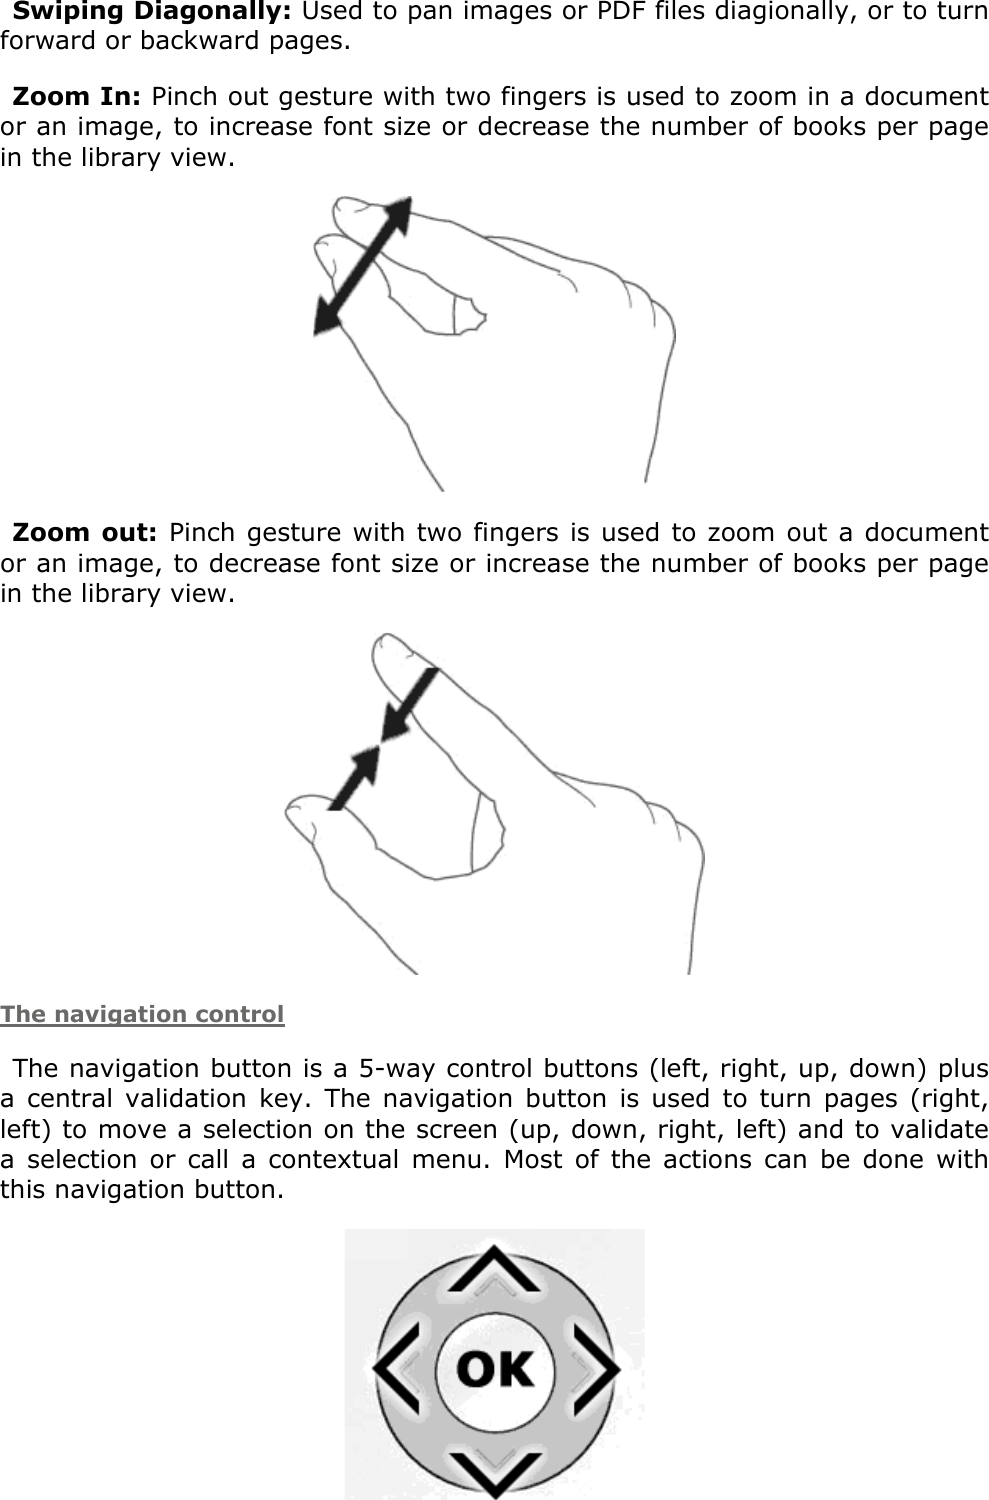 Swiping Diagonally: Used to pan images or PDF files diagionally, or to turn forward or backward pages.Zoom In: Pinch out gesture with two fingers is used to zoom in a document or an image, to increase font size or decrease the number of books per page in the library view. Zoom out: Pinch gesture with two fingers is used to zoom out a document or an image, to decrease font size or increase the number of books per page in the library view. The navigation controlThe navigation button is a 5-way control buttons (left, right, up, down) plus a  central  validation  key.  The  navigation button  is  used  to  turn  pages  (right, left) to move a selection on the screen (up, down, right, left) and to validate a  selection  or  call  a contextual  menu.  Most  of  the  actions  can  be done  with this navigation button.  